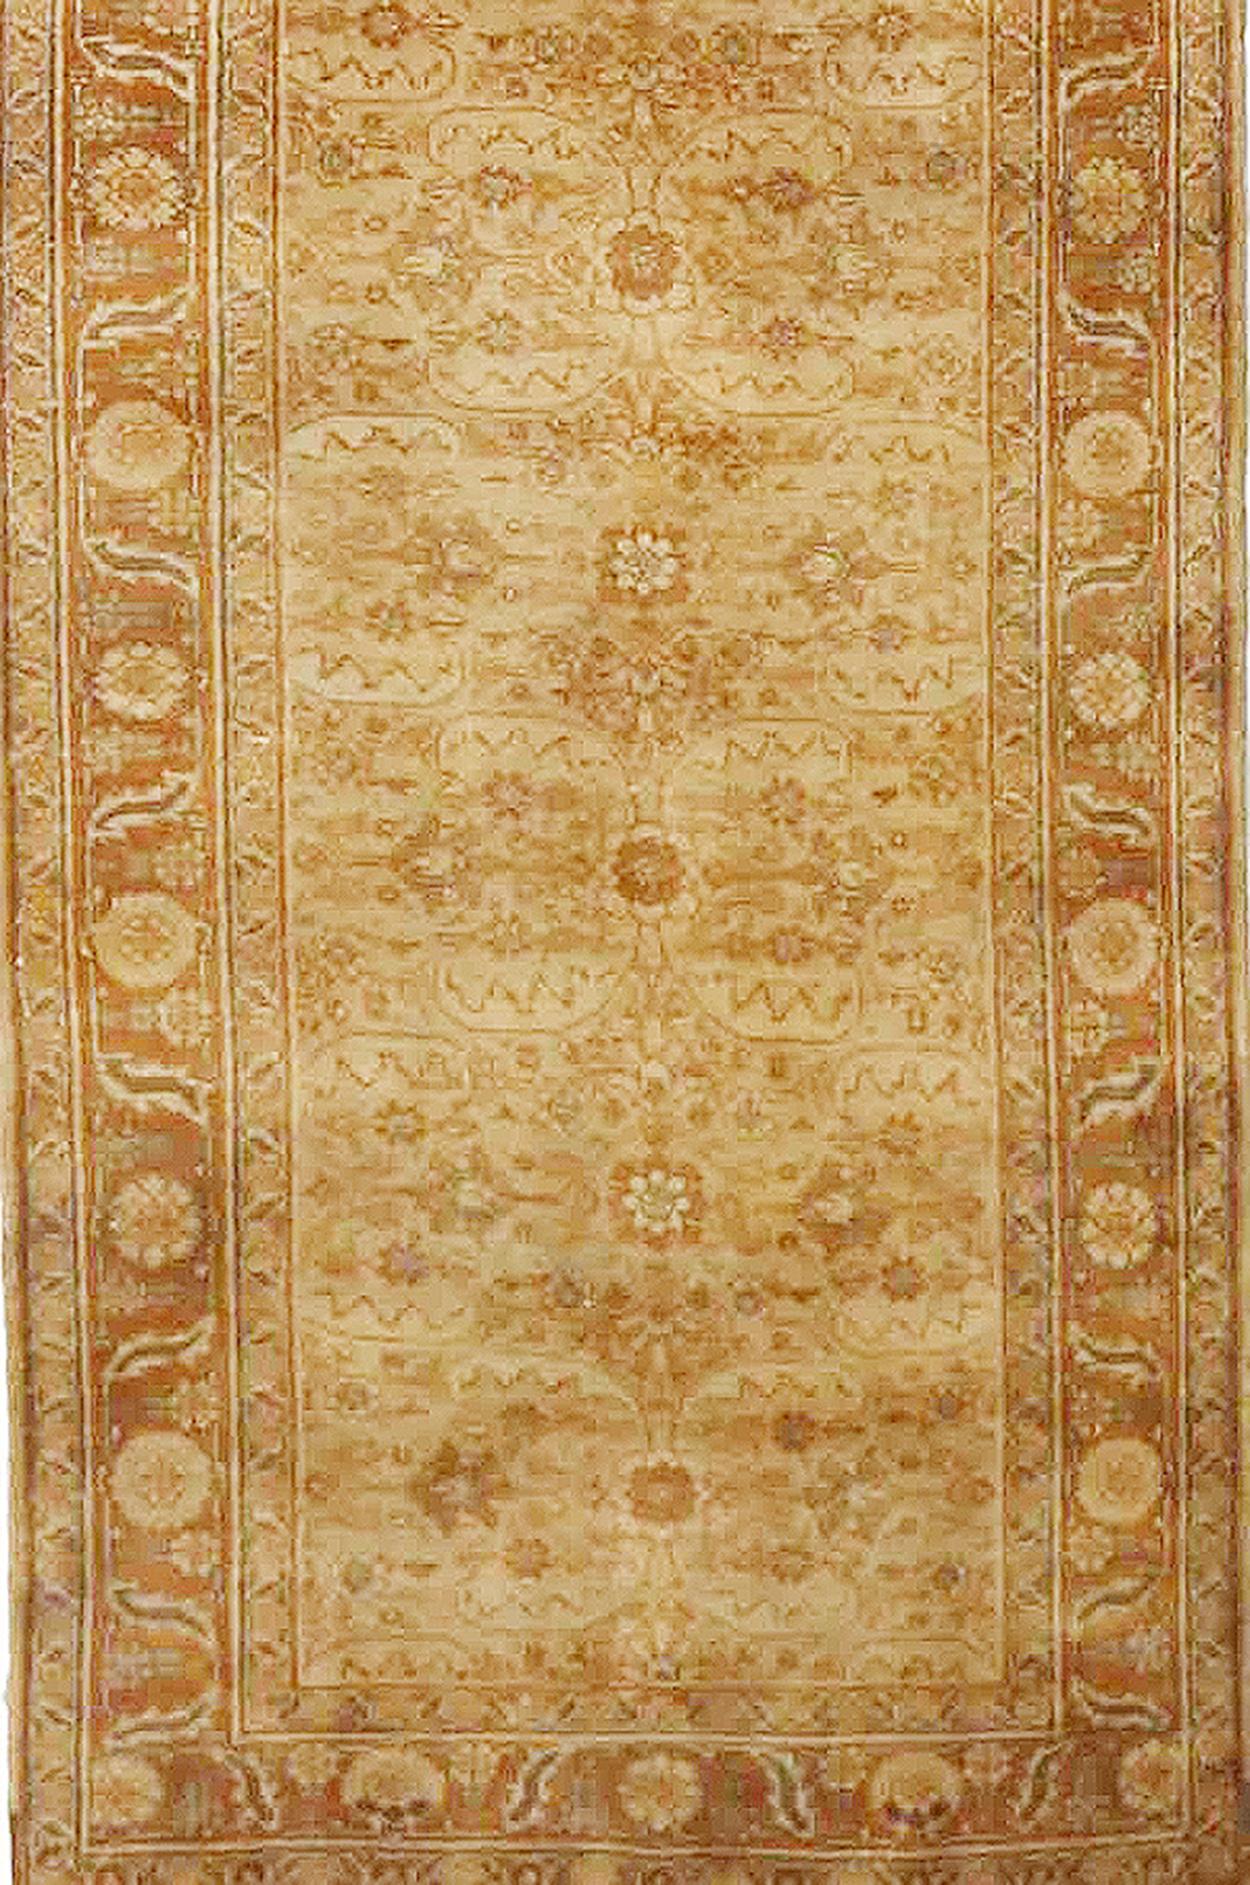 Hand-Woven Antique Persian Tabriz Runner Rug with Brown and White Flower Details For Sale